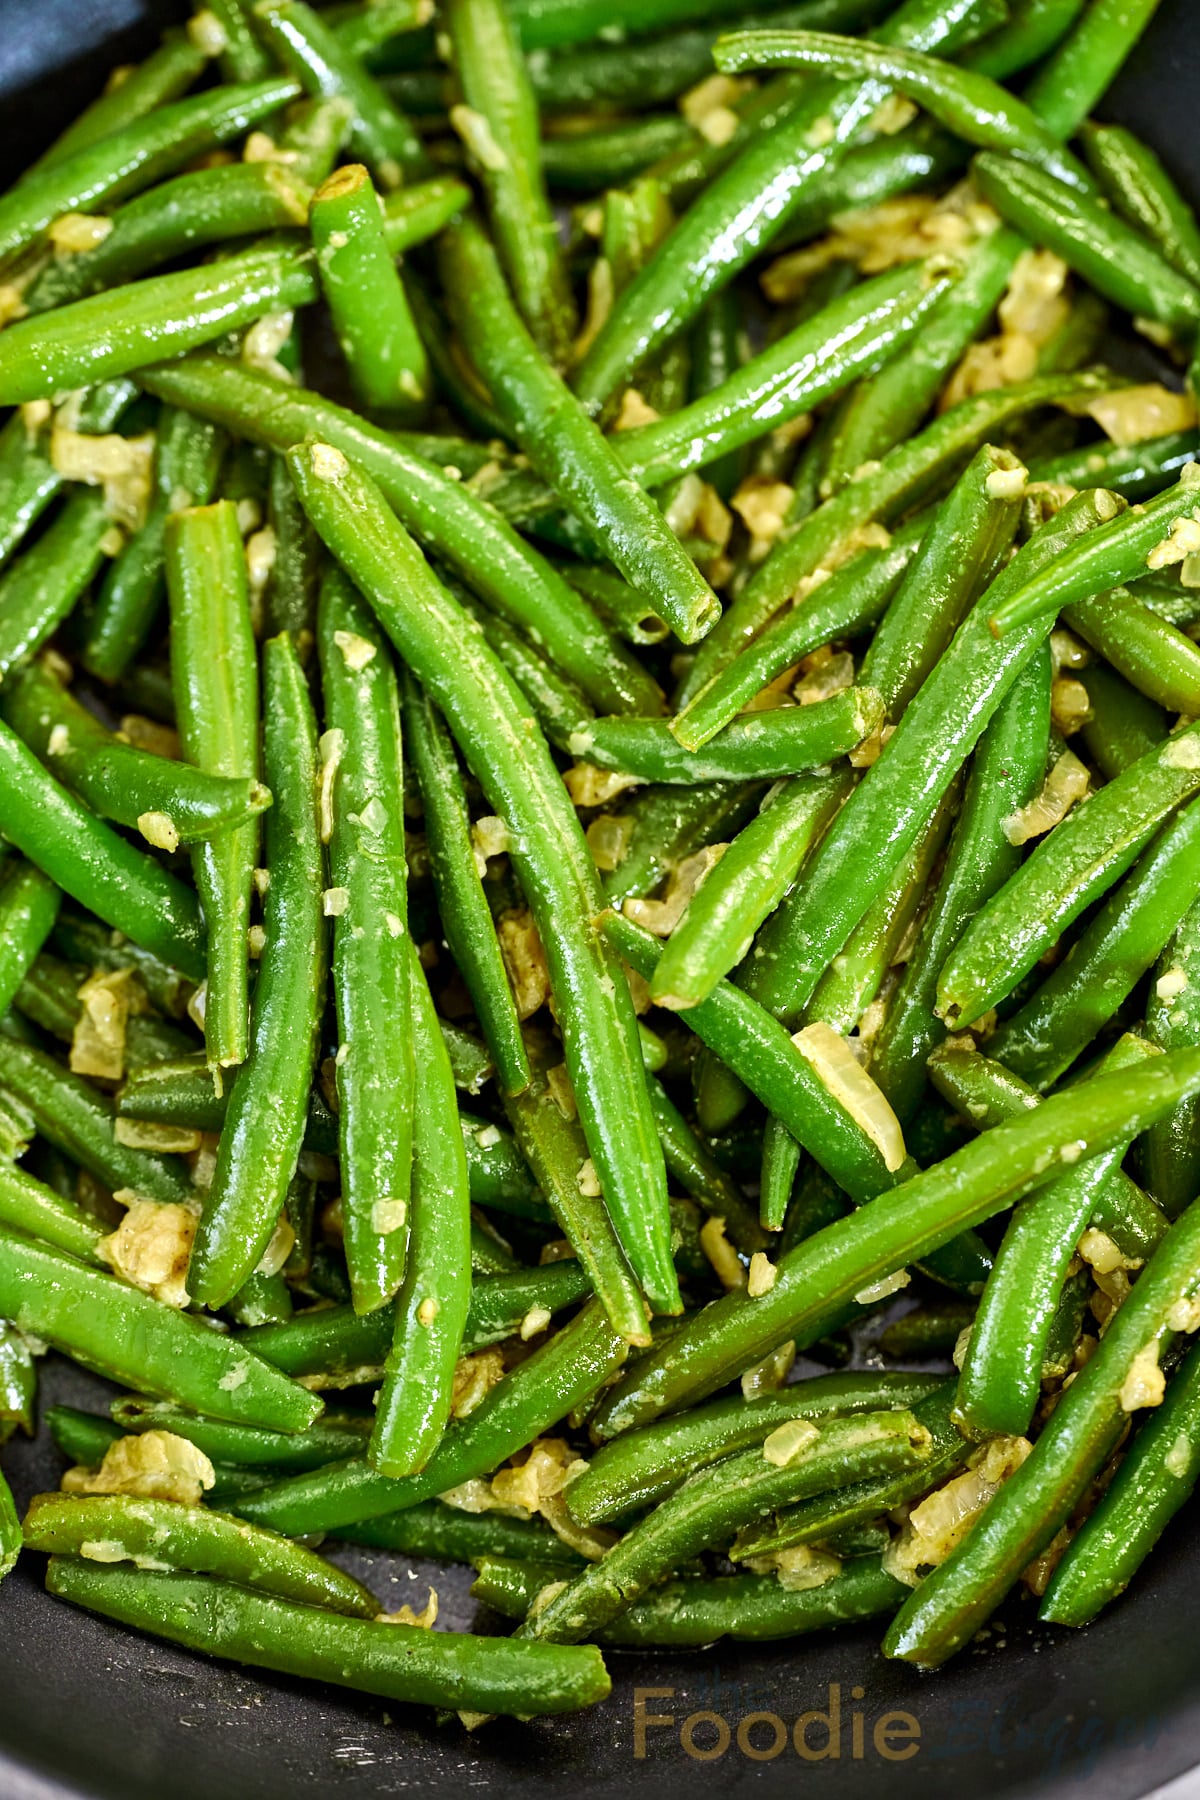 thefoodieblogger sauteed green beans recipe 1